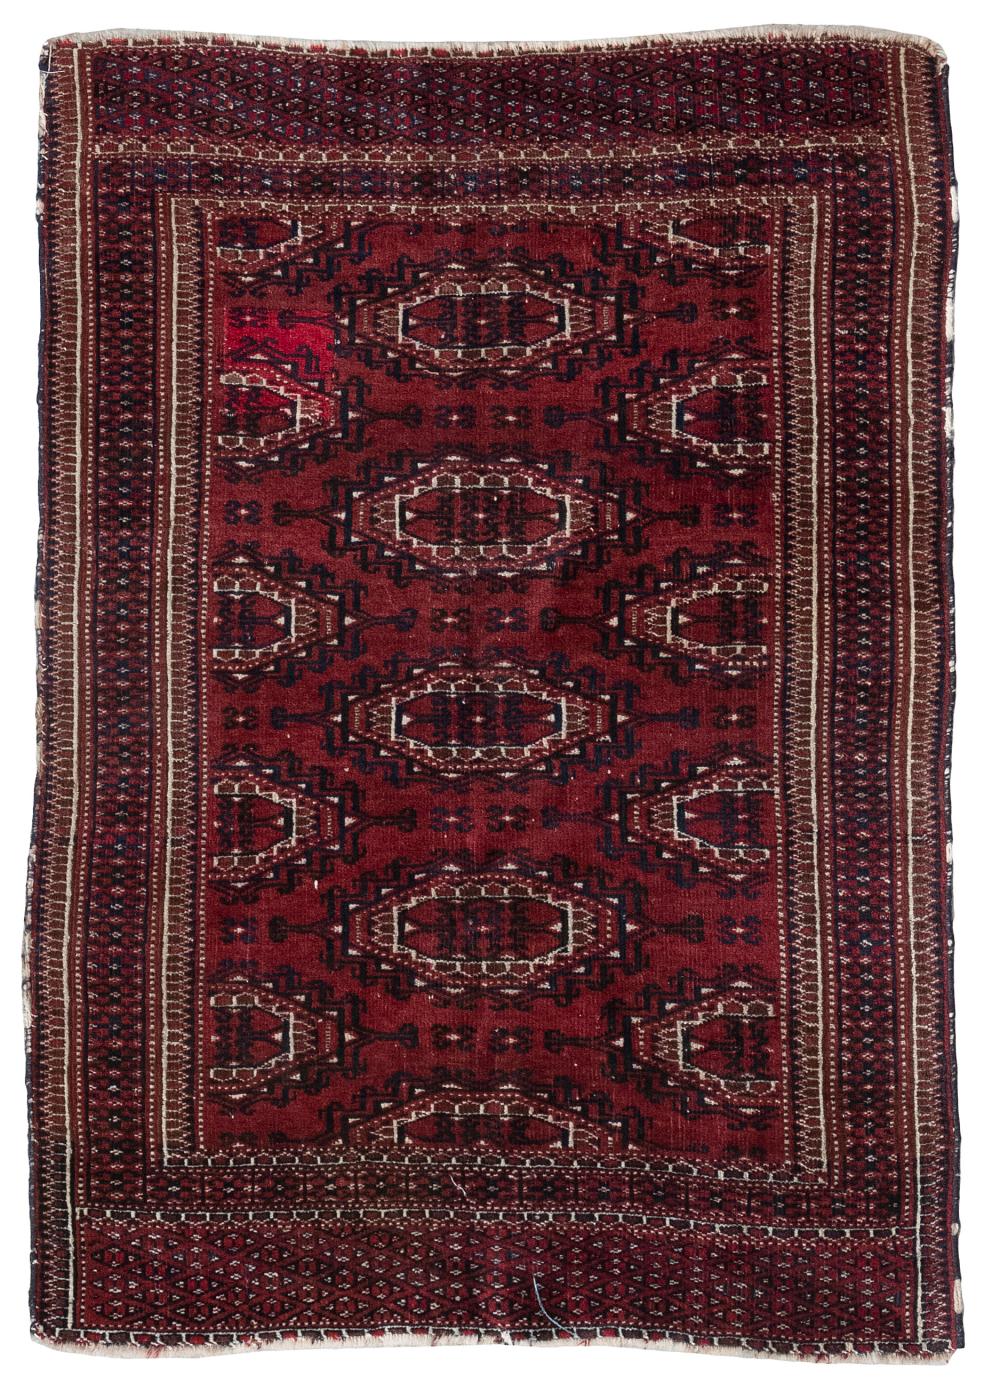 CHODOR SCATTER RUG: 2’10” X